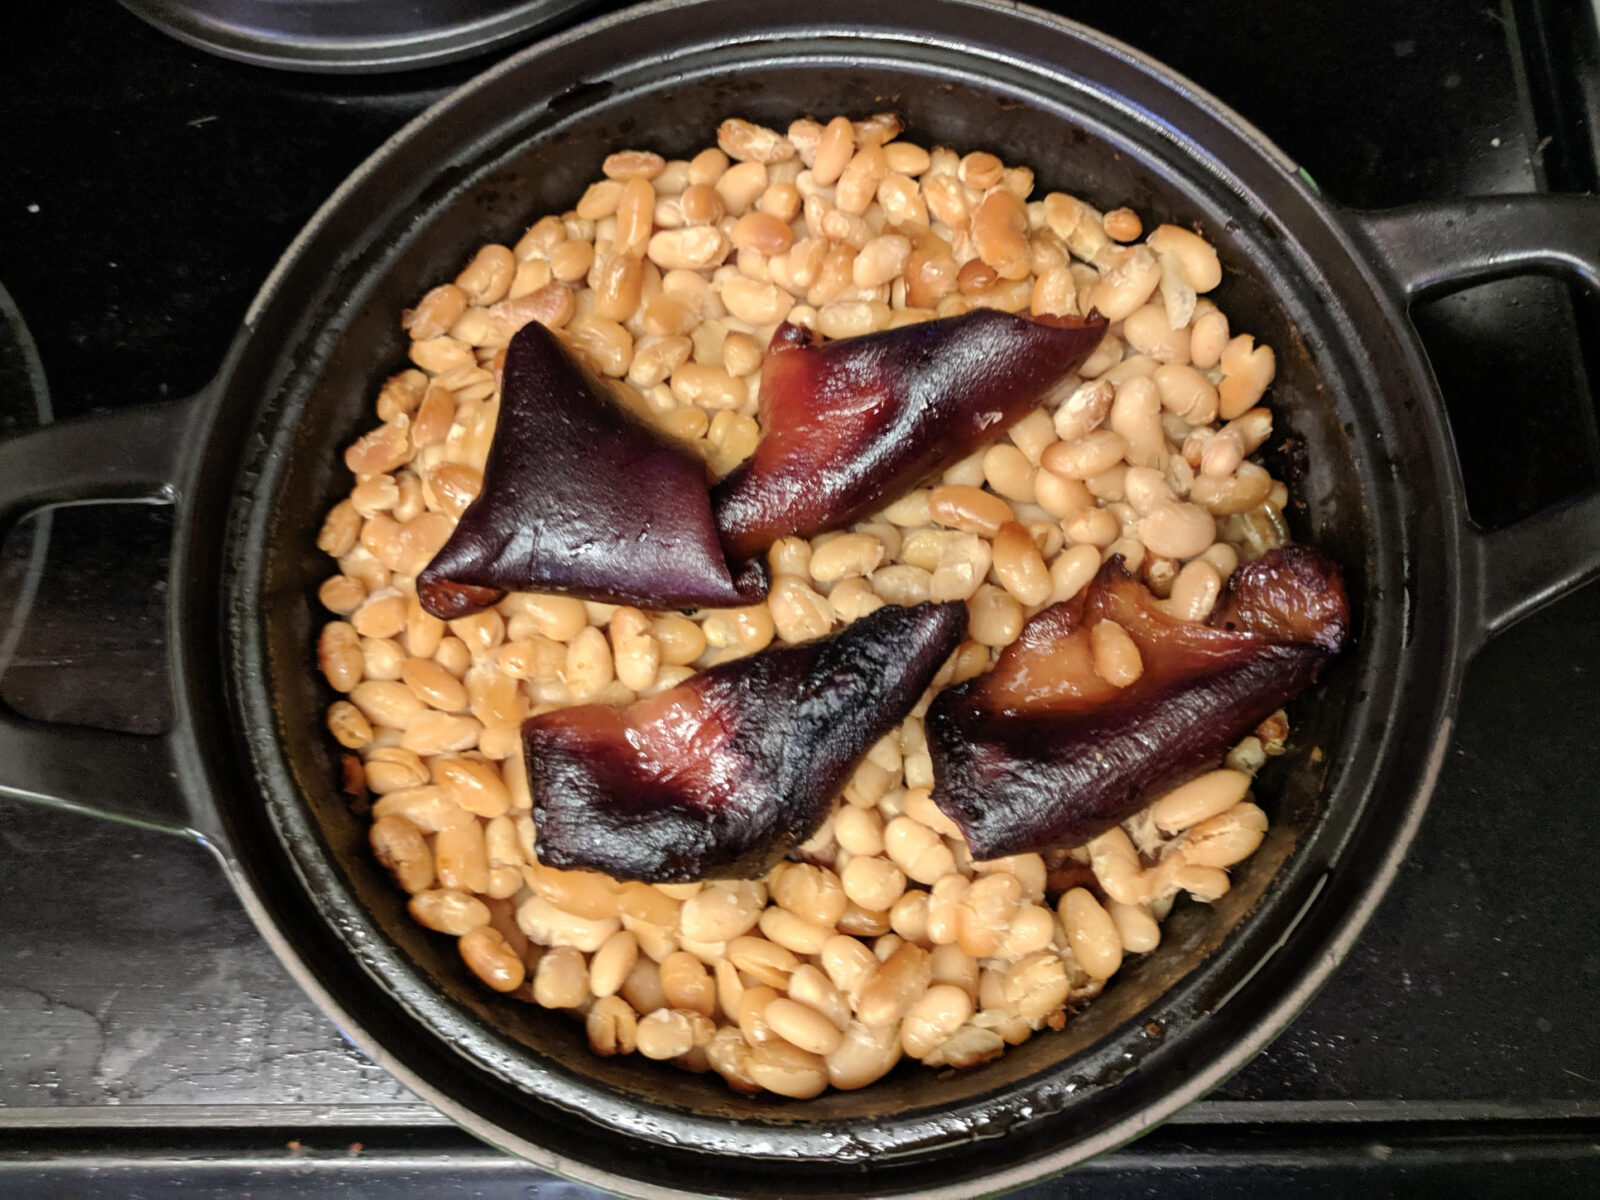 Boston Baked Beans in the pot